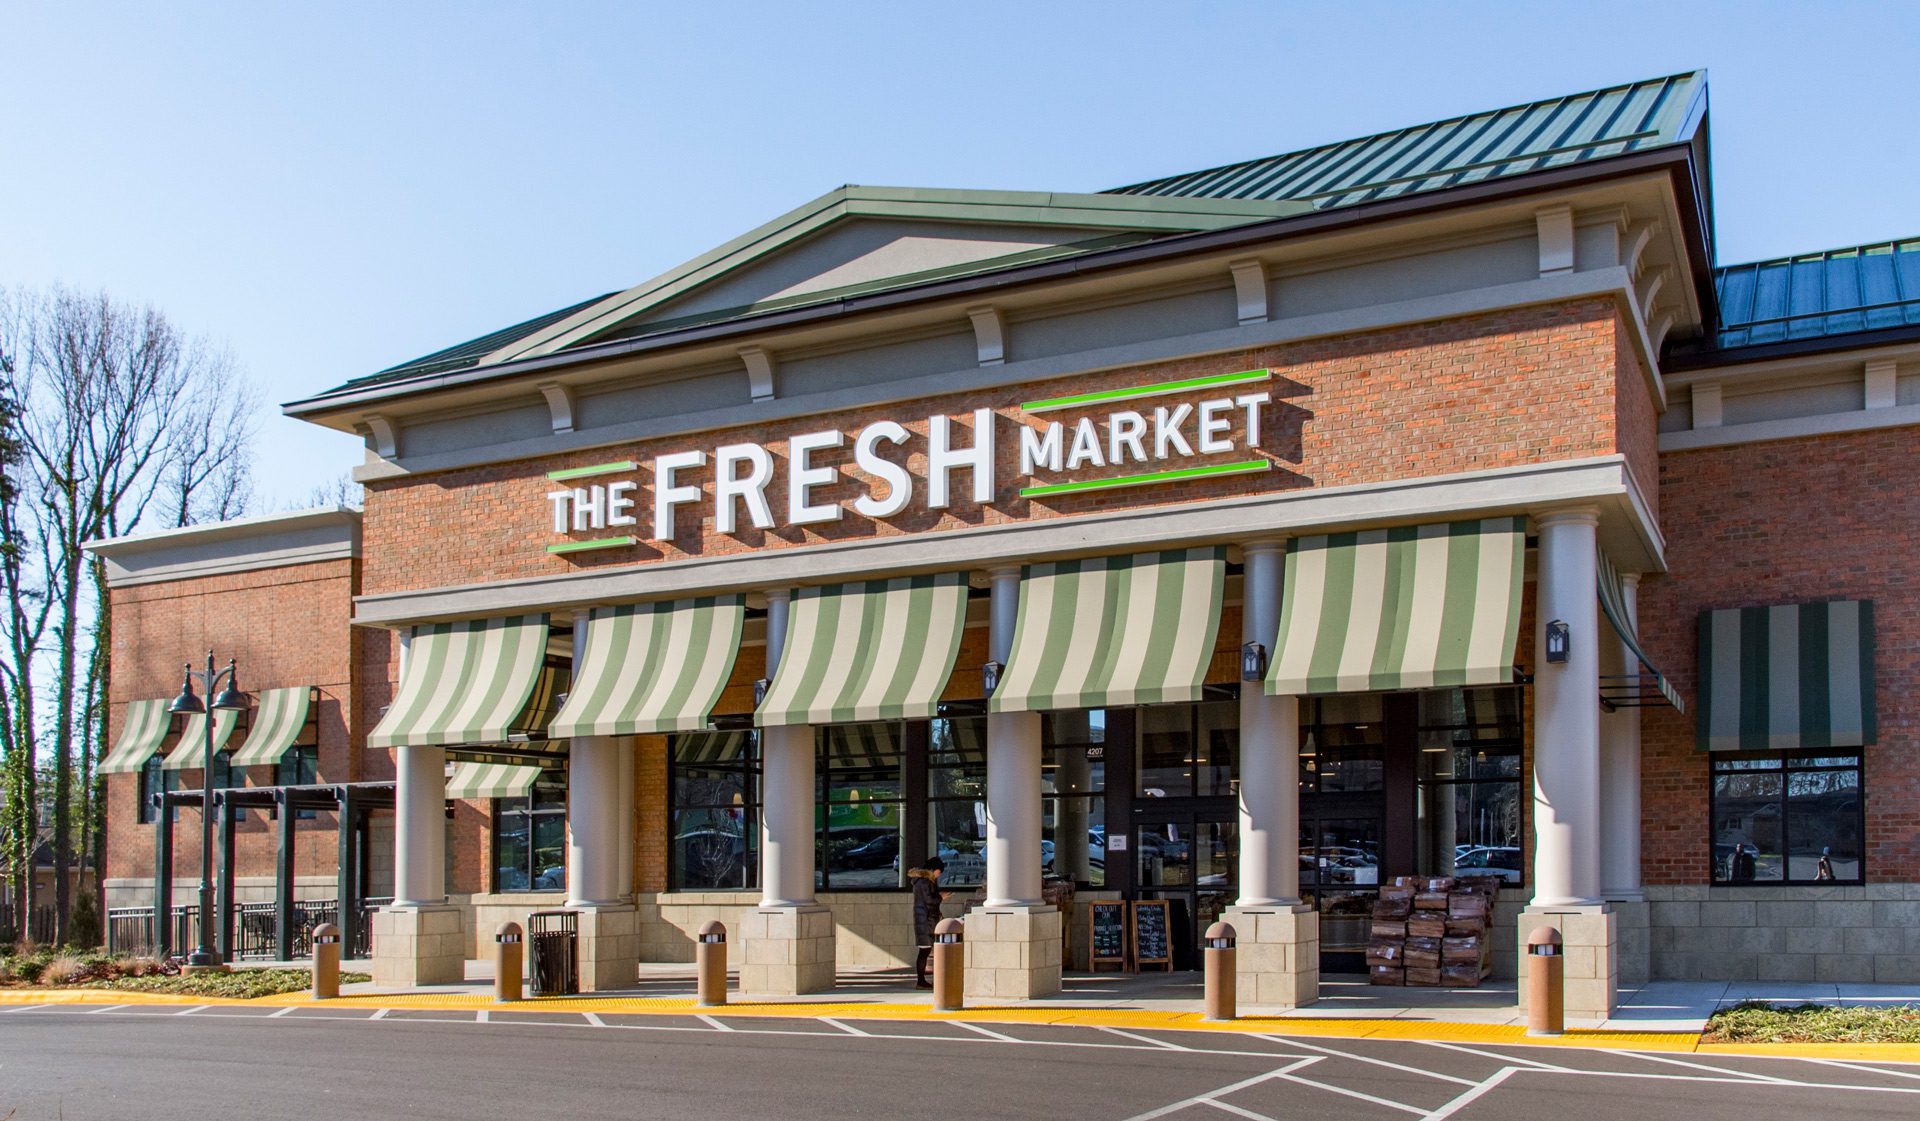 Strawberry Hill The Fresh Market exterior main entrance brick and striped green awnings